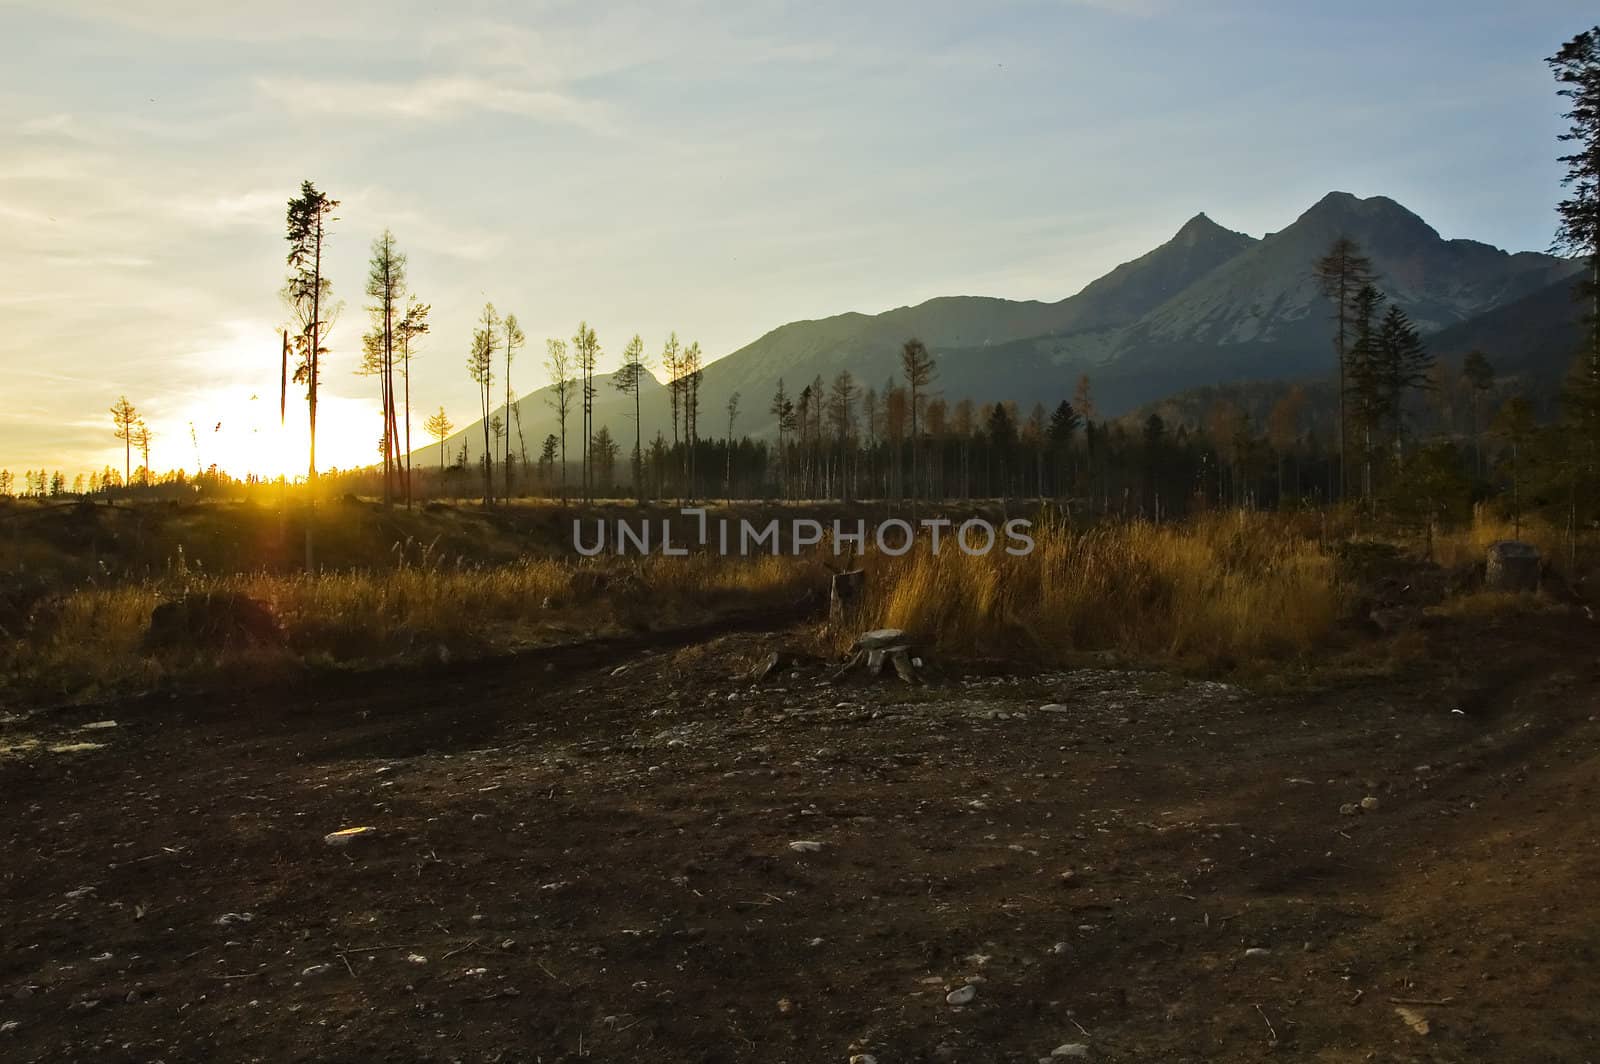 Sunset in High Tatras Mountains in Slovakia.